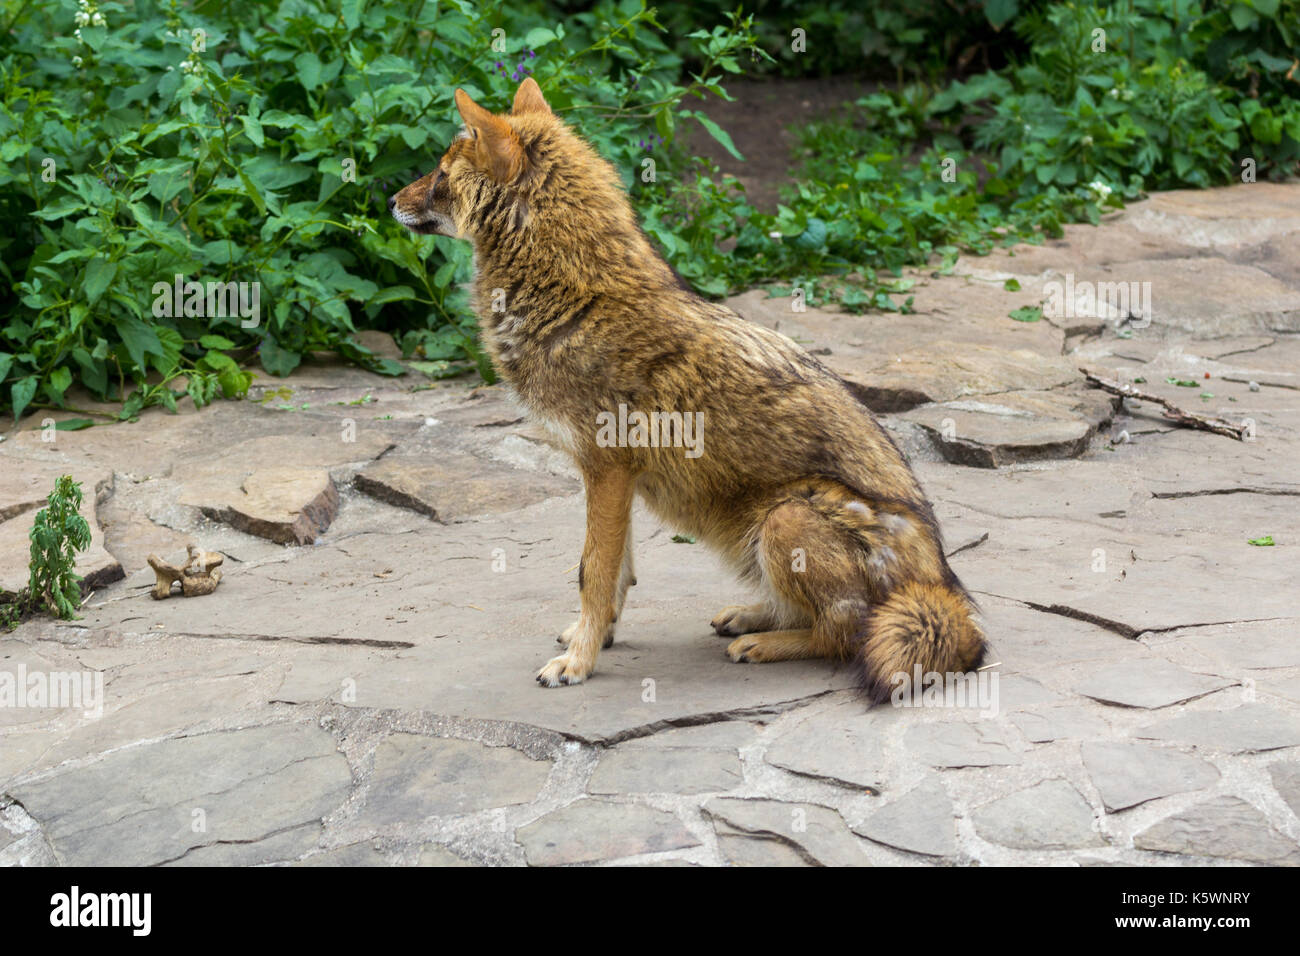 The golden jackal wandered the garden path on a hot summer day Stock Photo